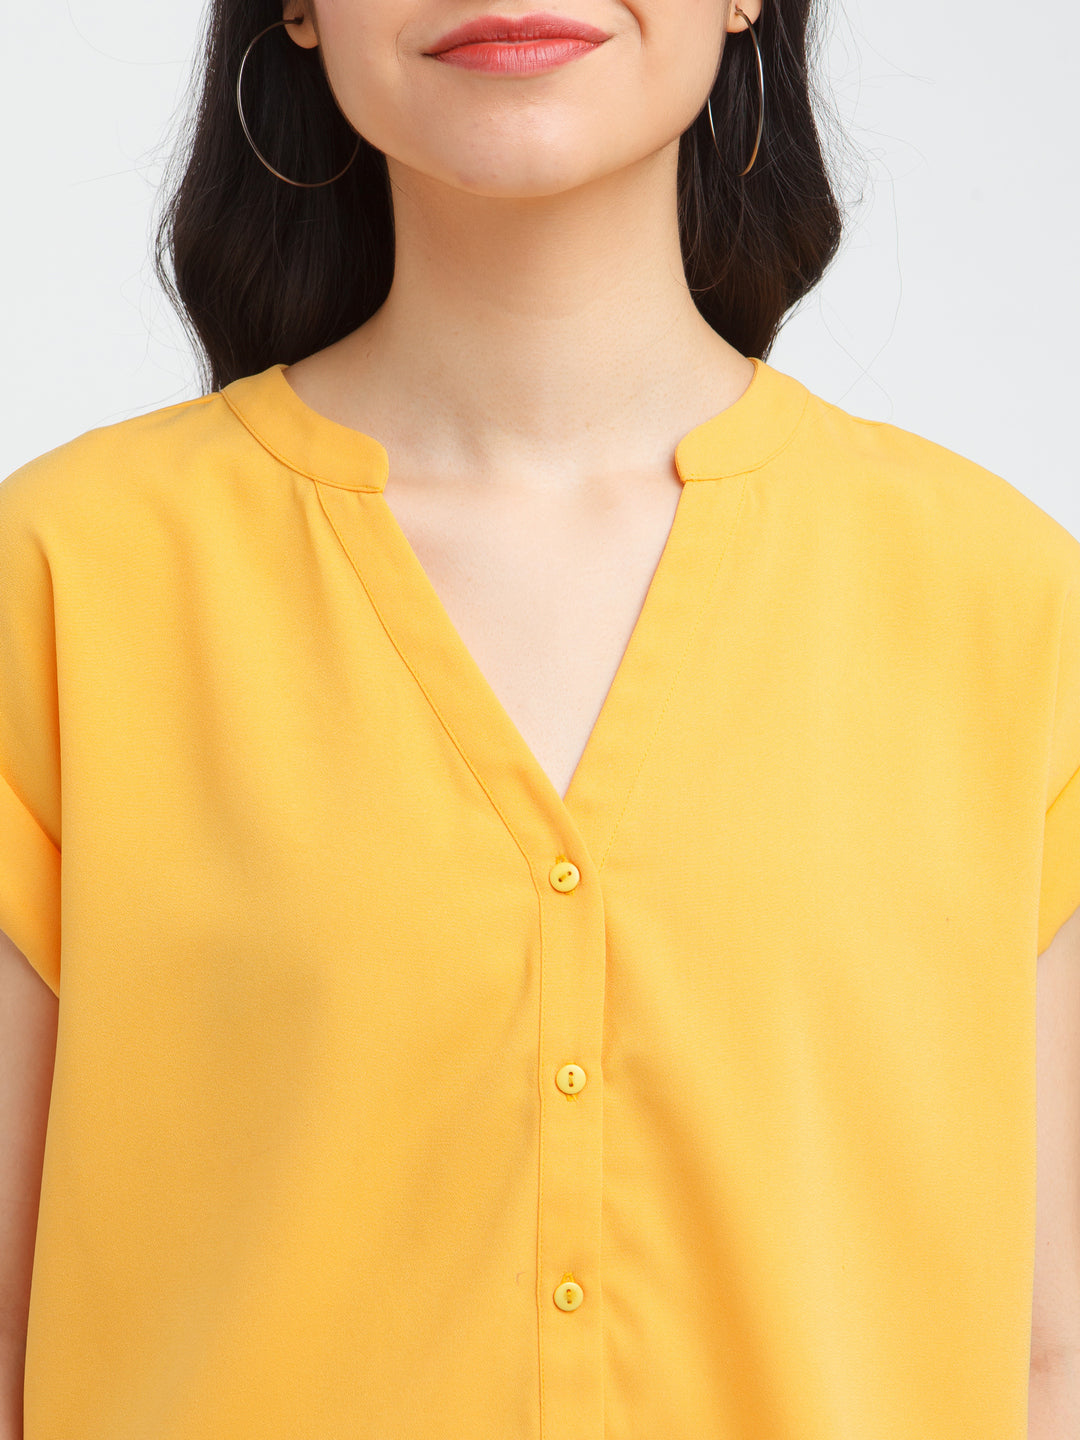 Yellow Solid Top For Women